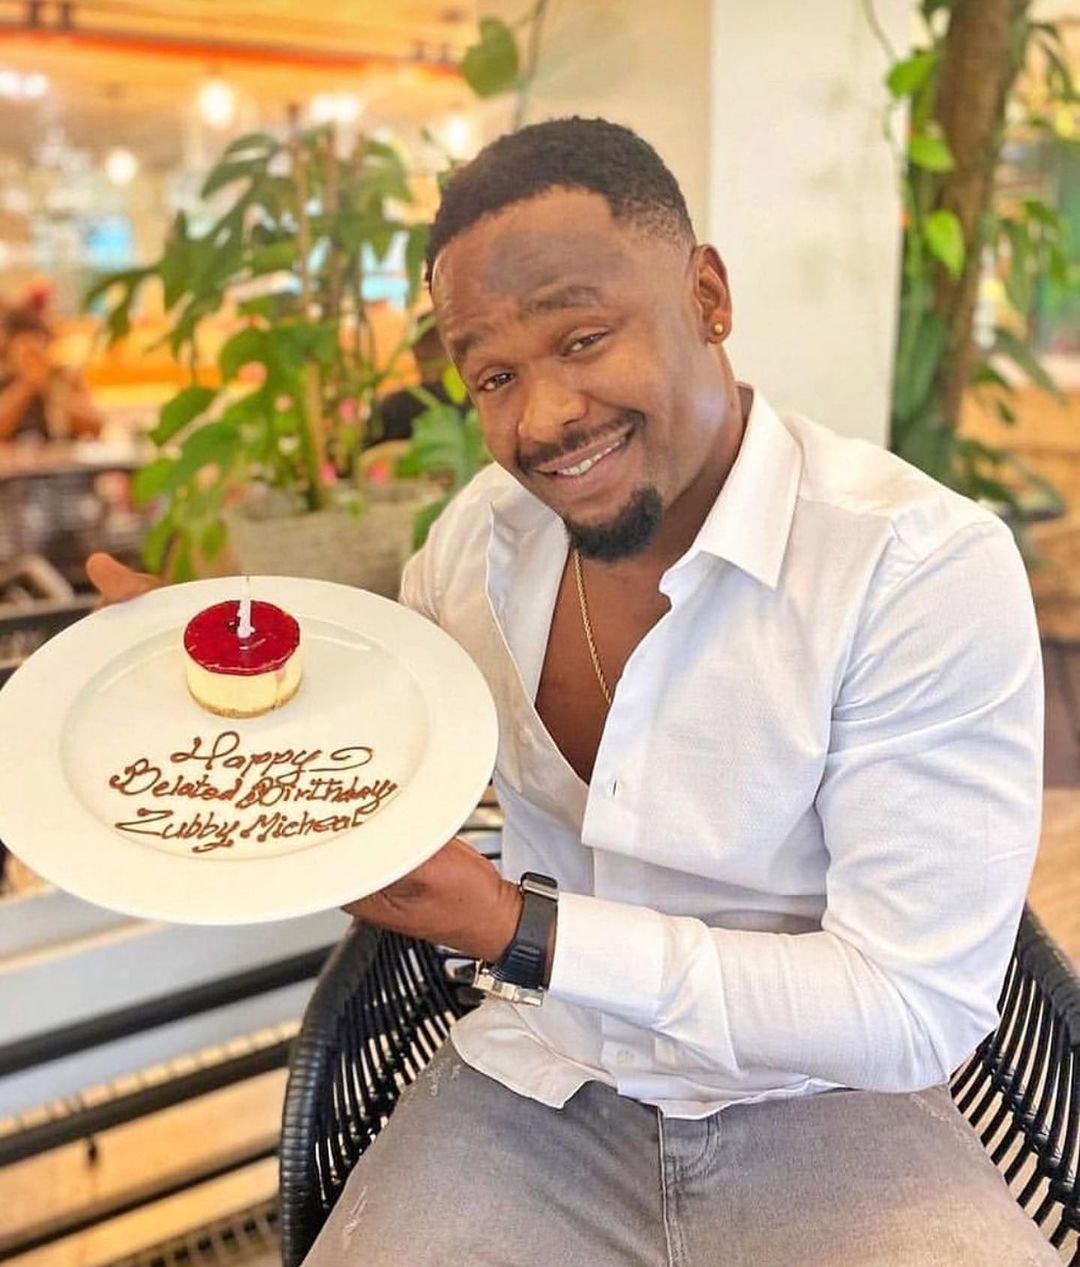 Obi Cubana, Peter Psquare, others celebrate Zubby Michael on his 38th birthday